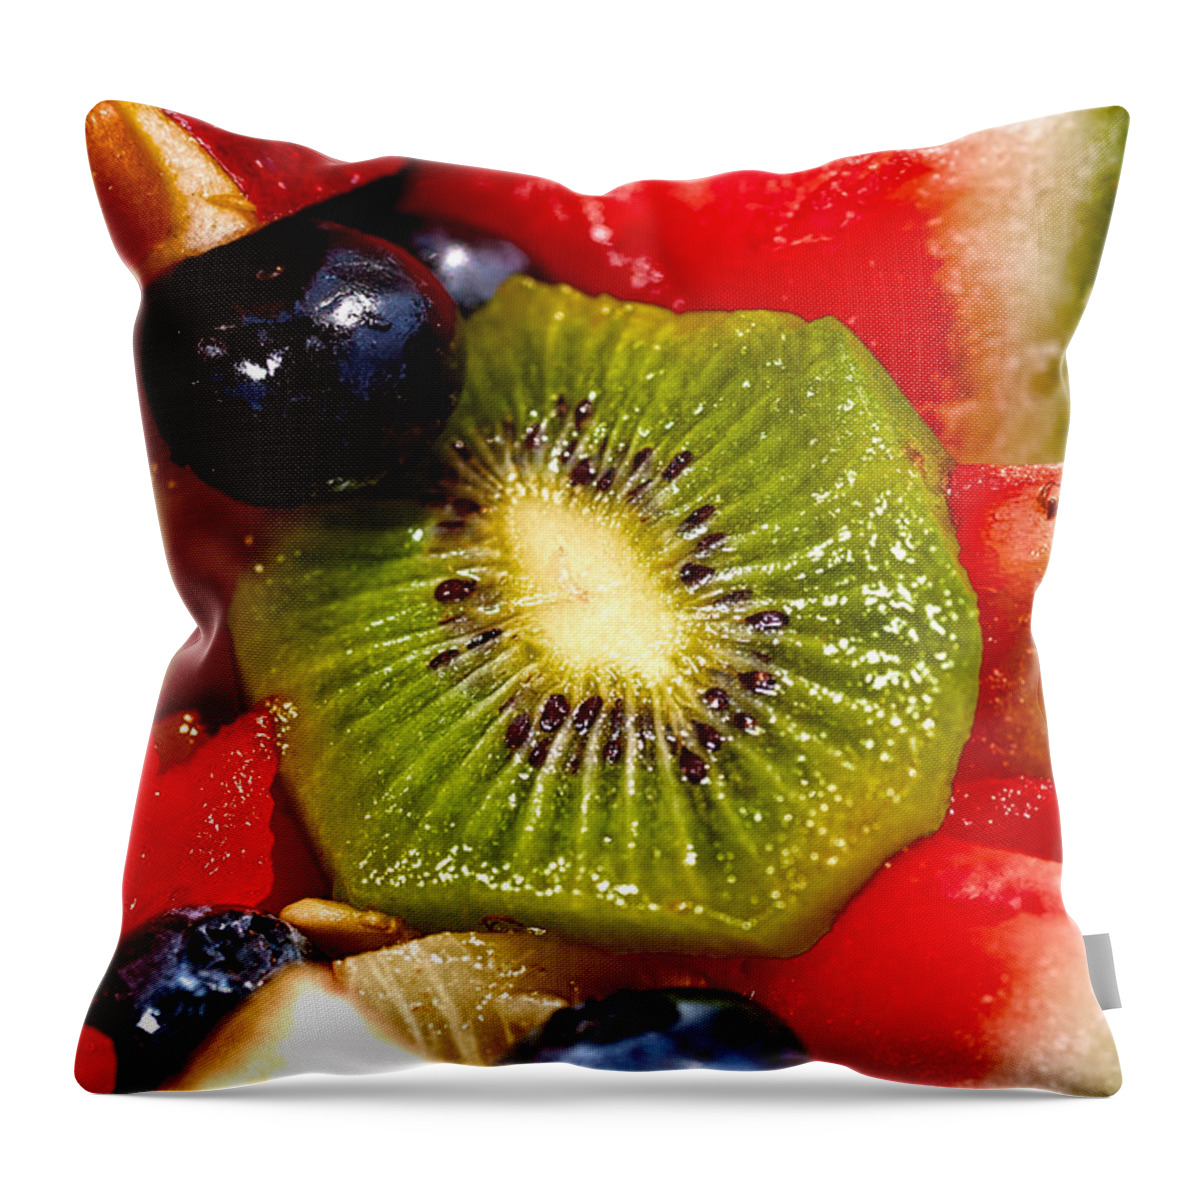 Fruit Throw Pillow featuring the photograph Refreshing by Christopher Holmes